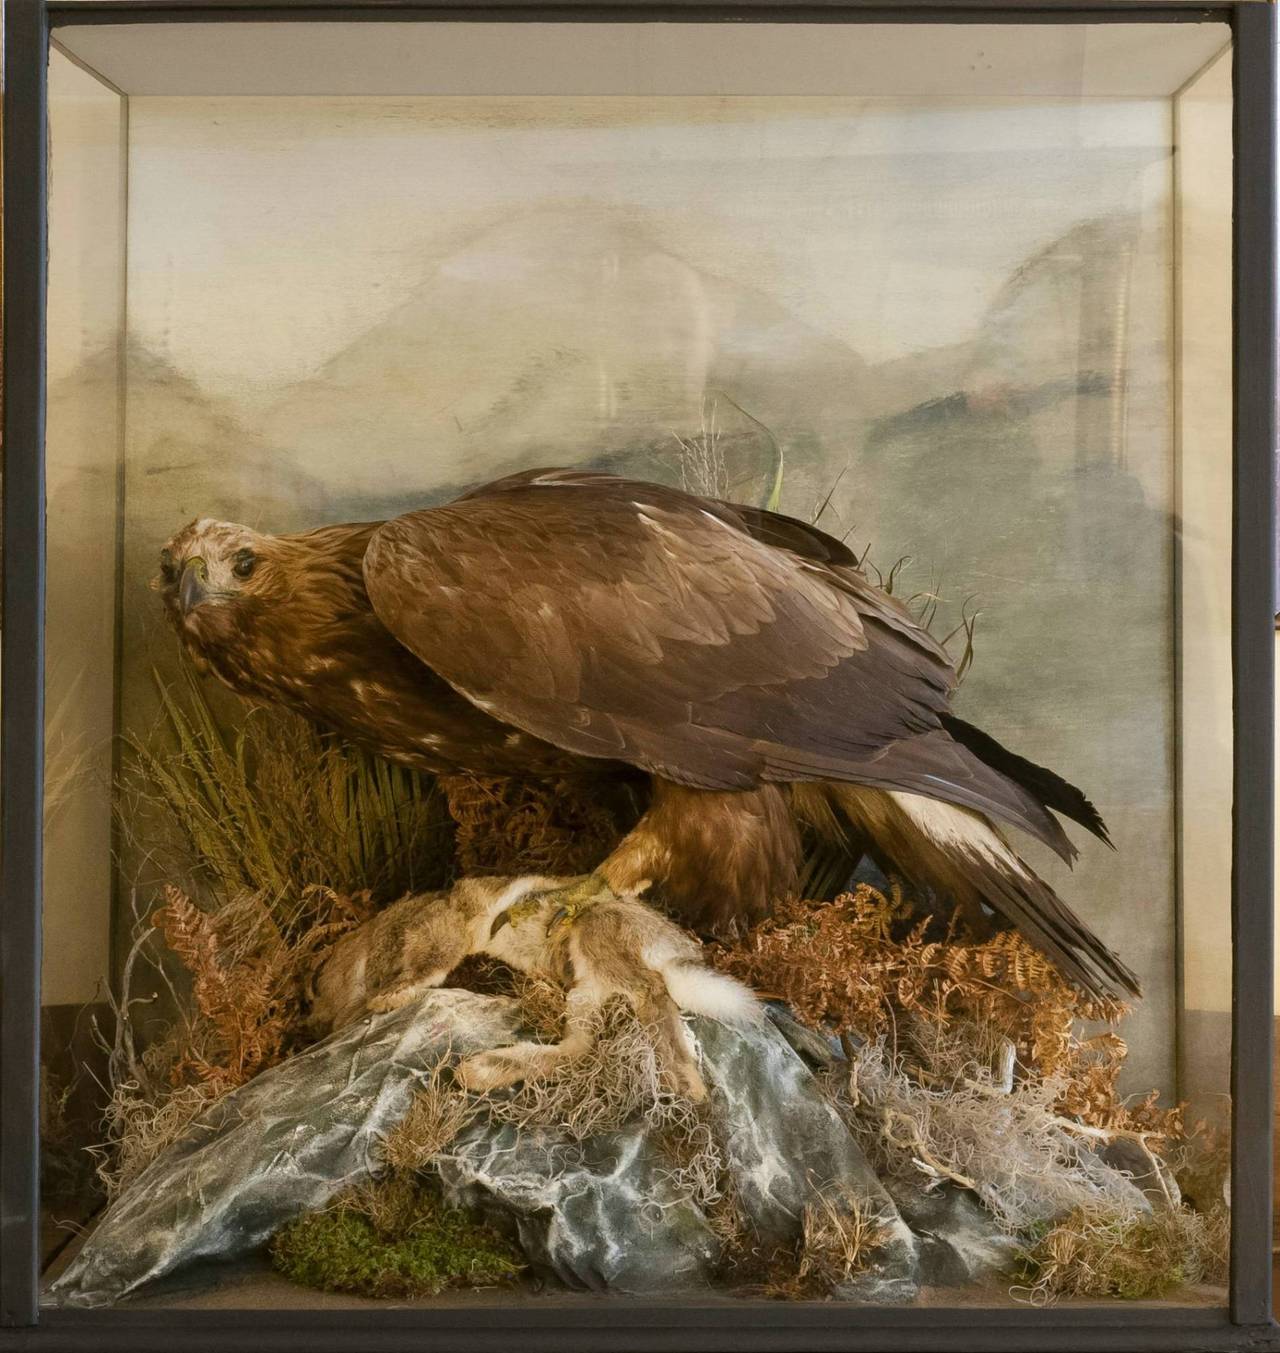 A very large taxidermy golden eagle with its prey (taxidermy rabbit) in a naturalistic mountain top setting, in a large glass case.